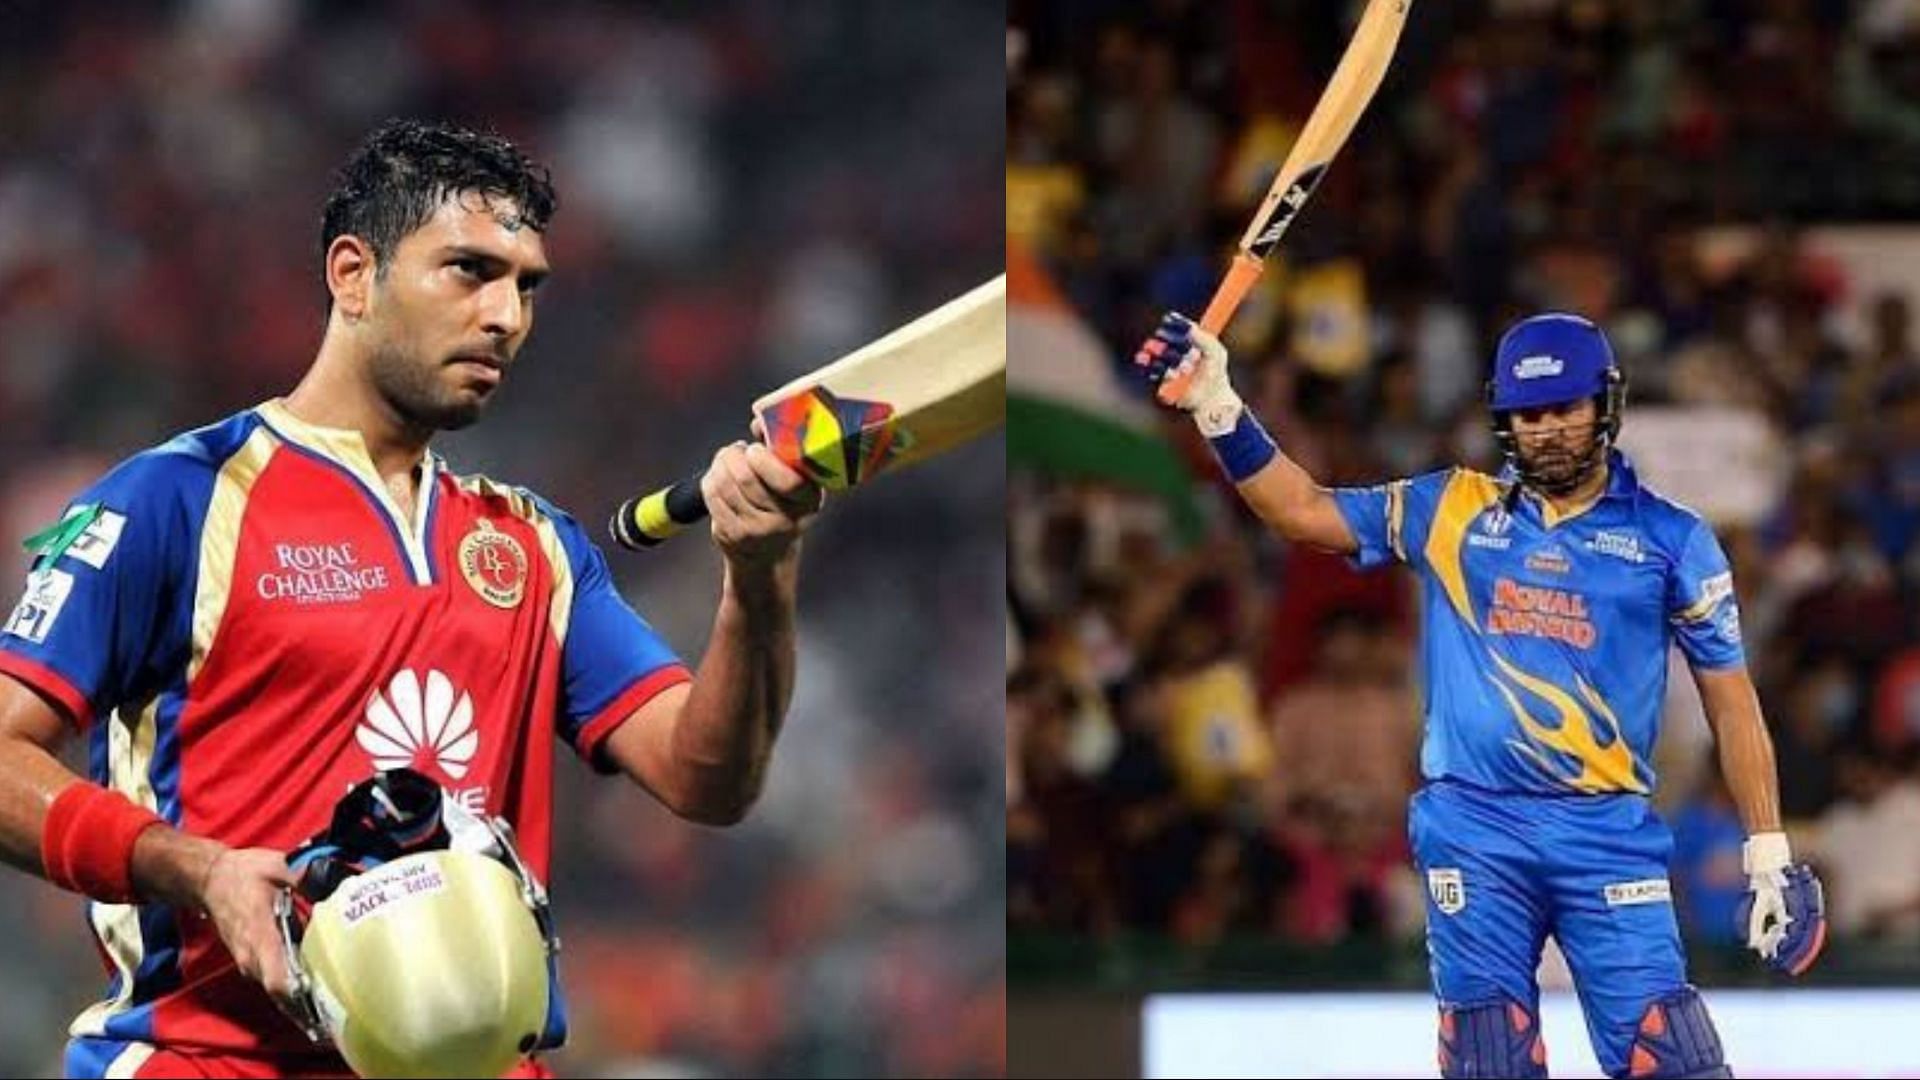 Former Royal Challengers Bangalore all-rounder Yuvraj Singh will turn up for India Maharajas in the upcoming Legends League Cricket